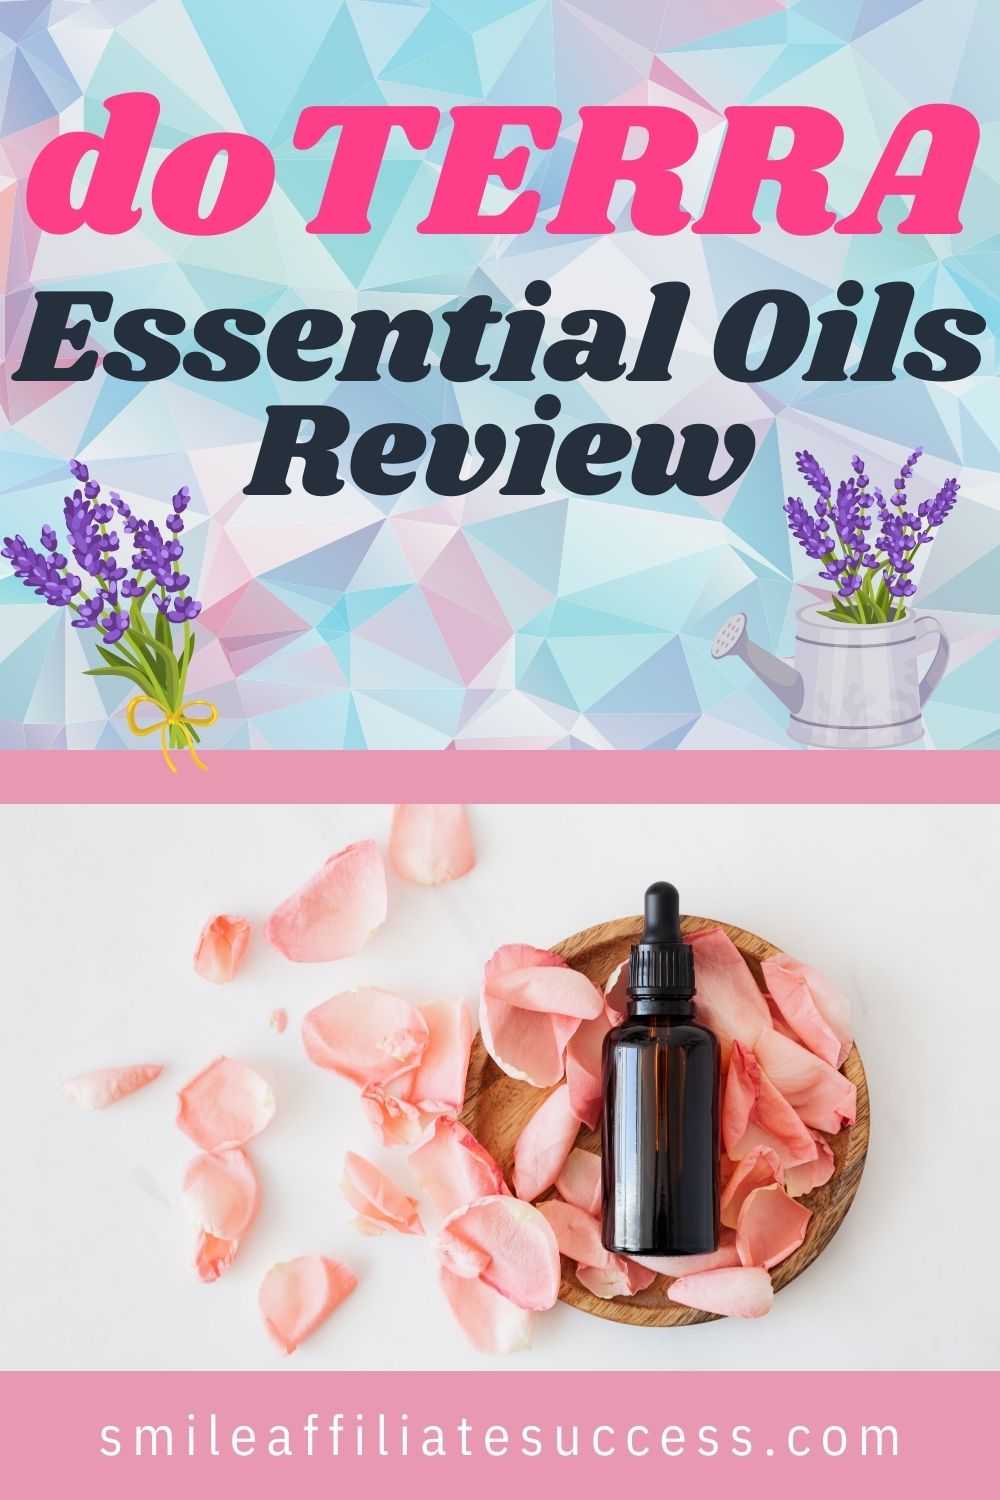 doTERRA Essential Oils Review - Is It A Scam?